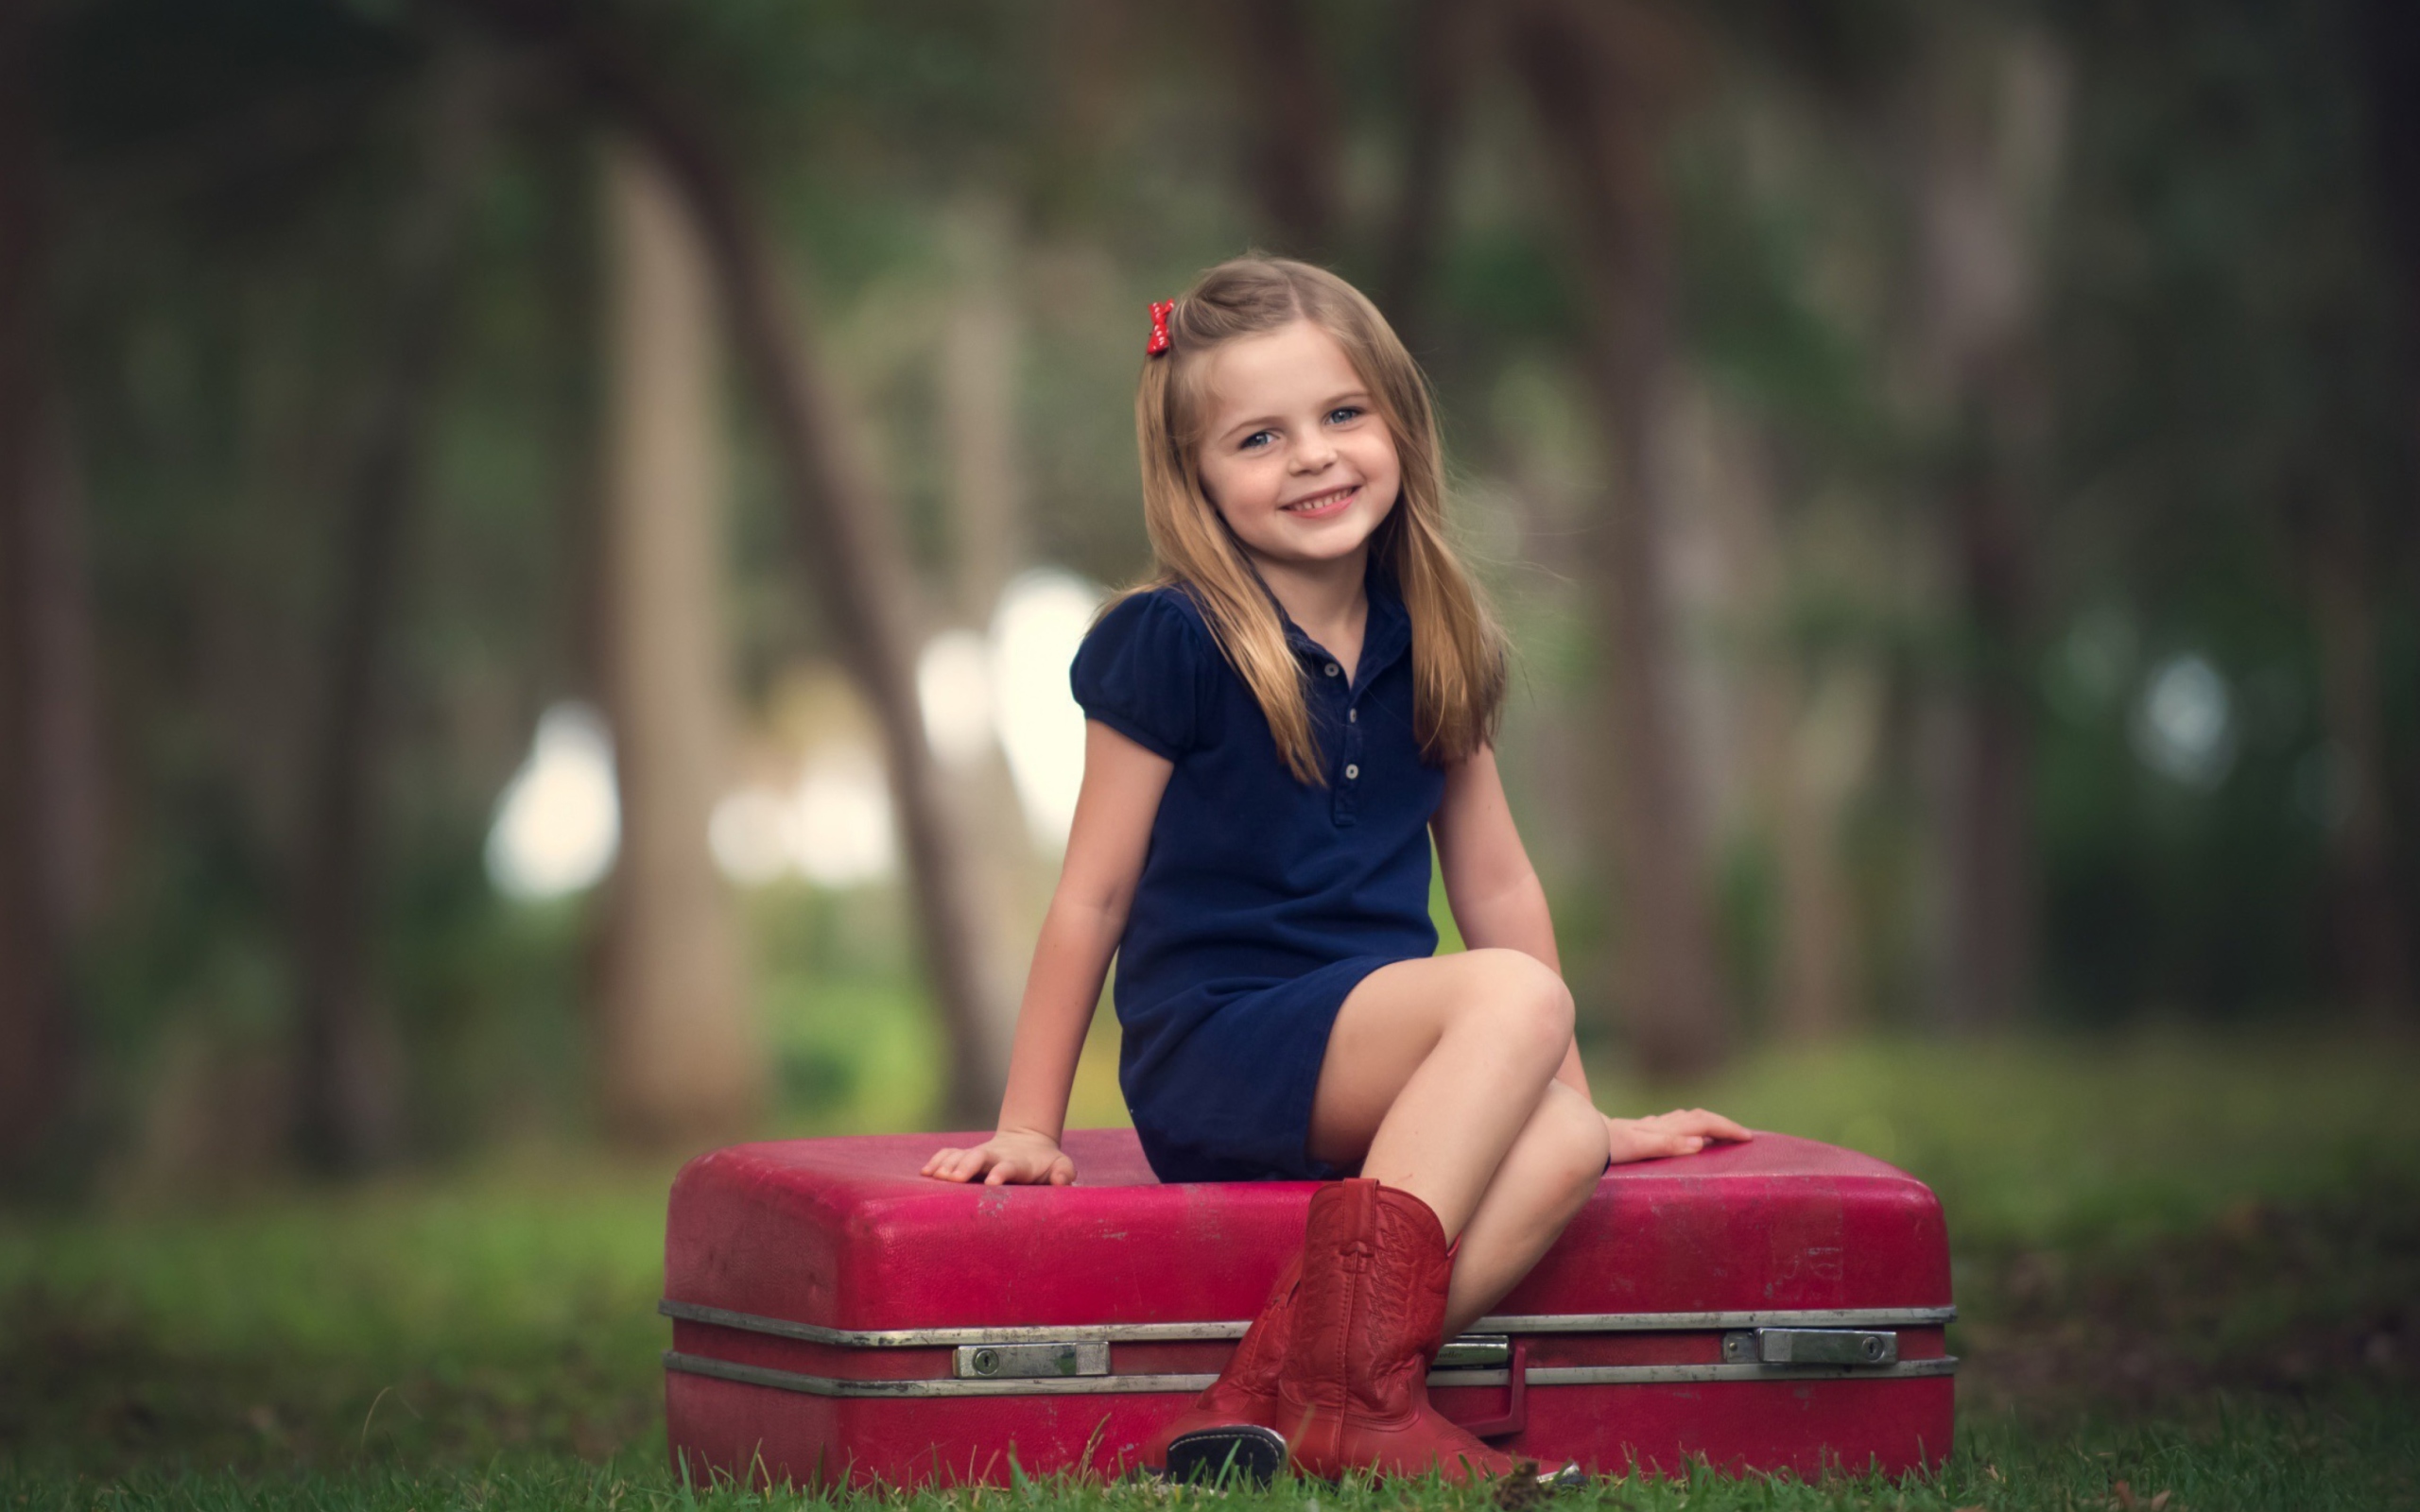 Das Little Girl Sitting On Red Suitcase Wallpaper 2560x1600